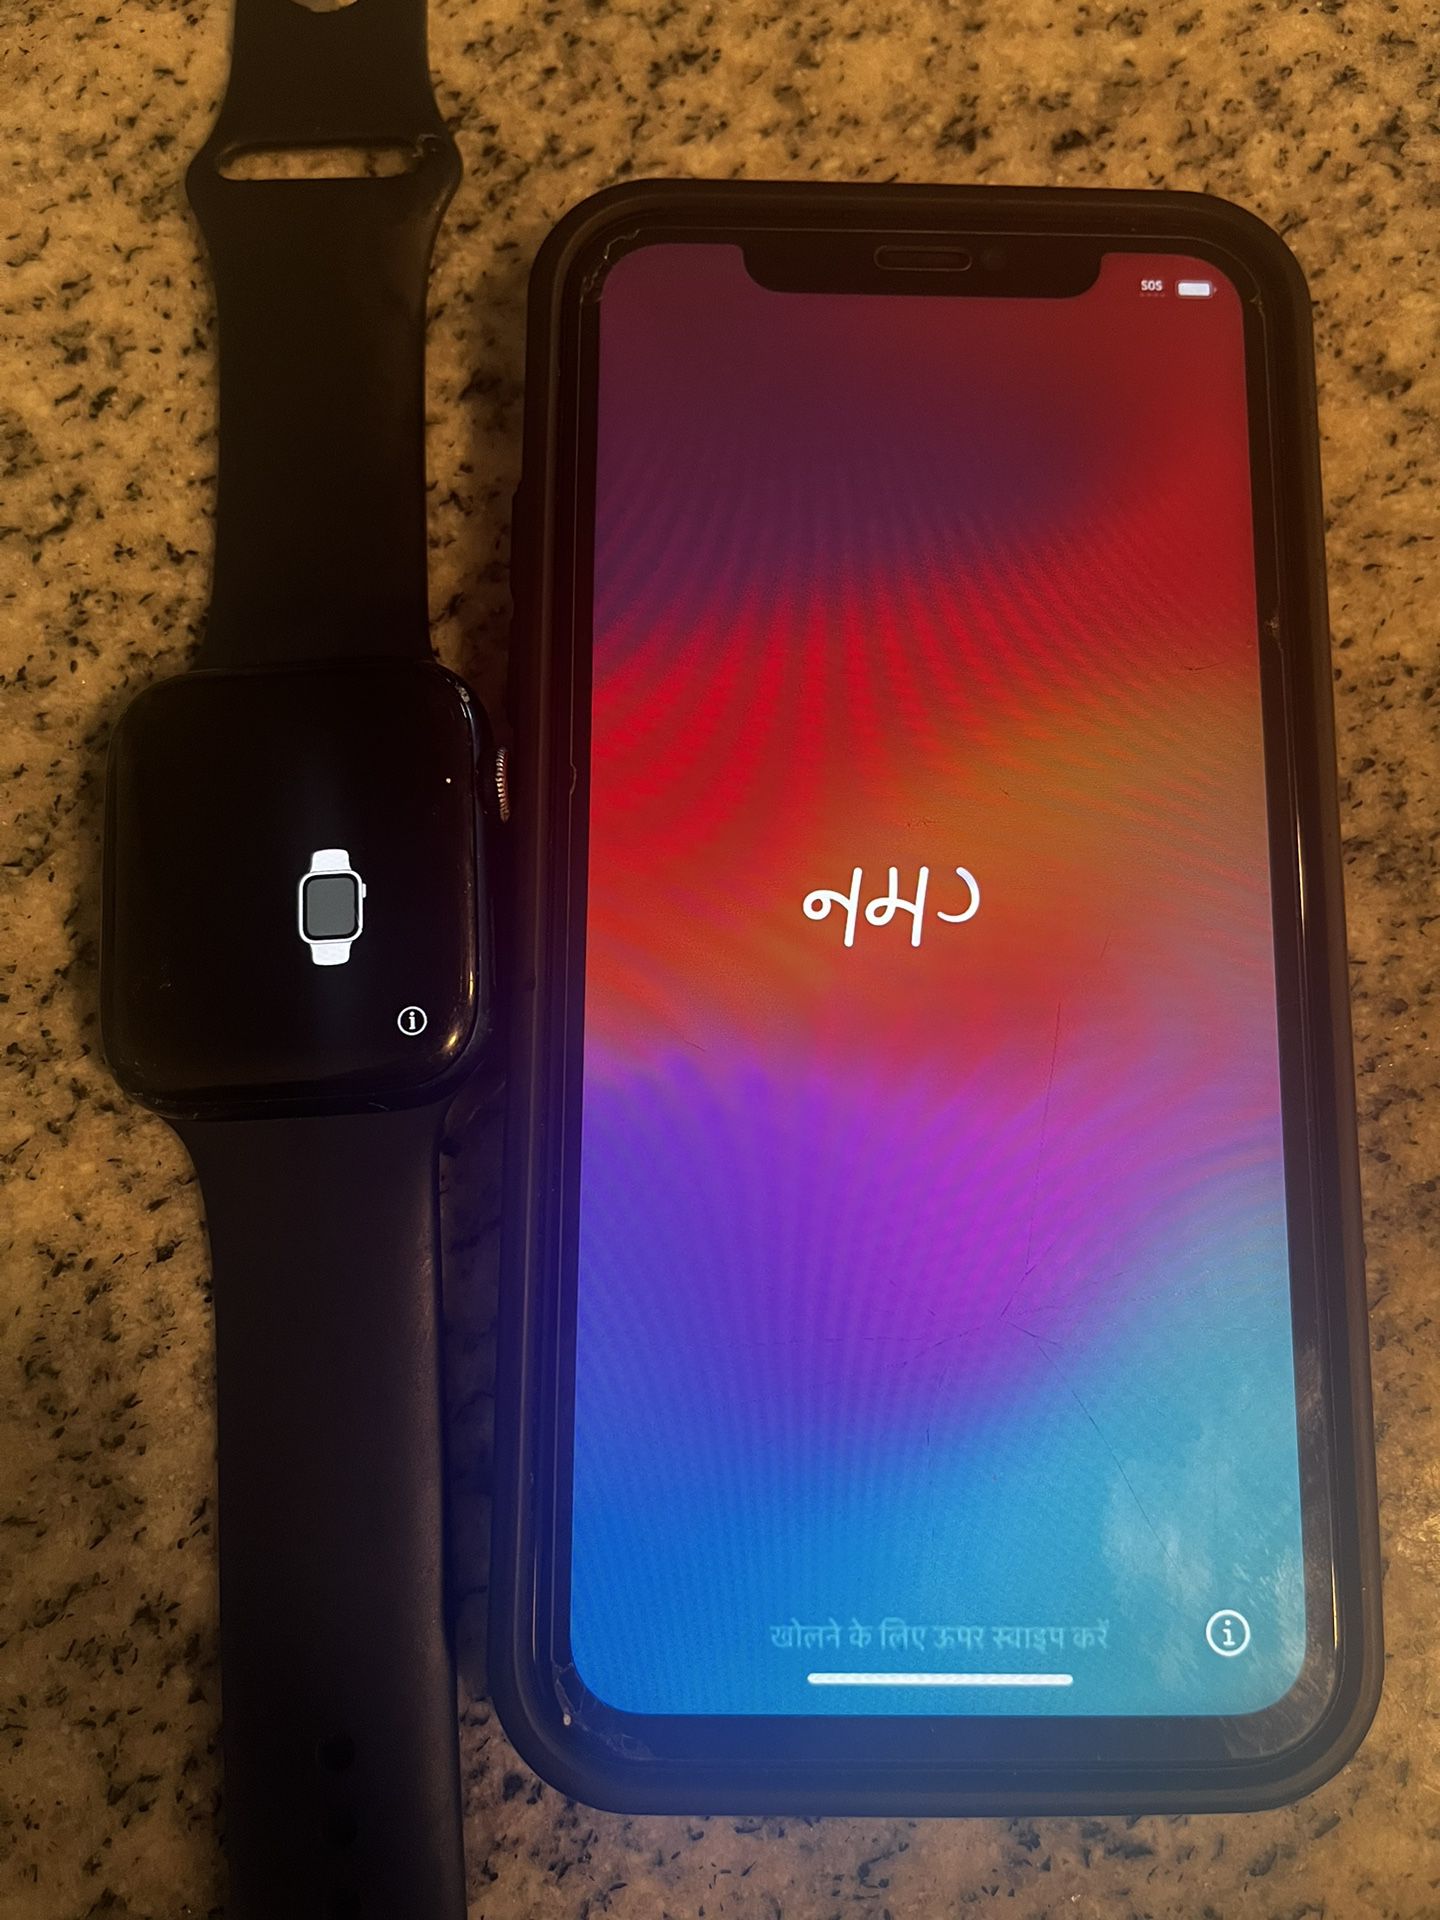  Apple Watch For Sale